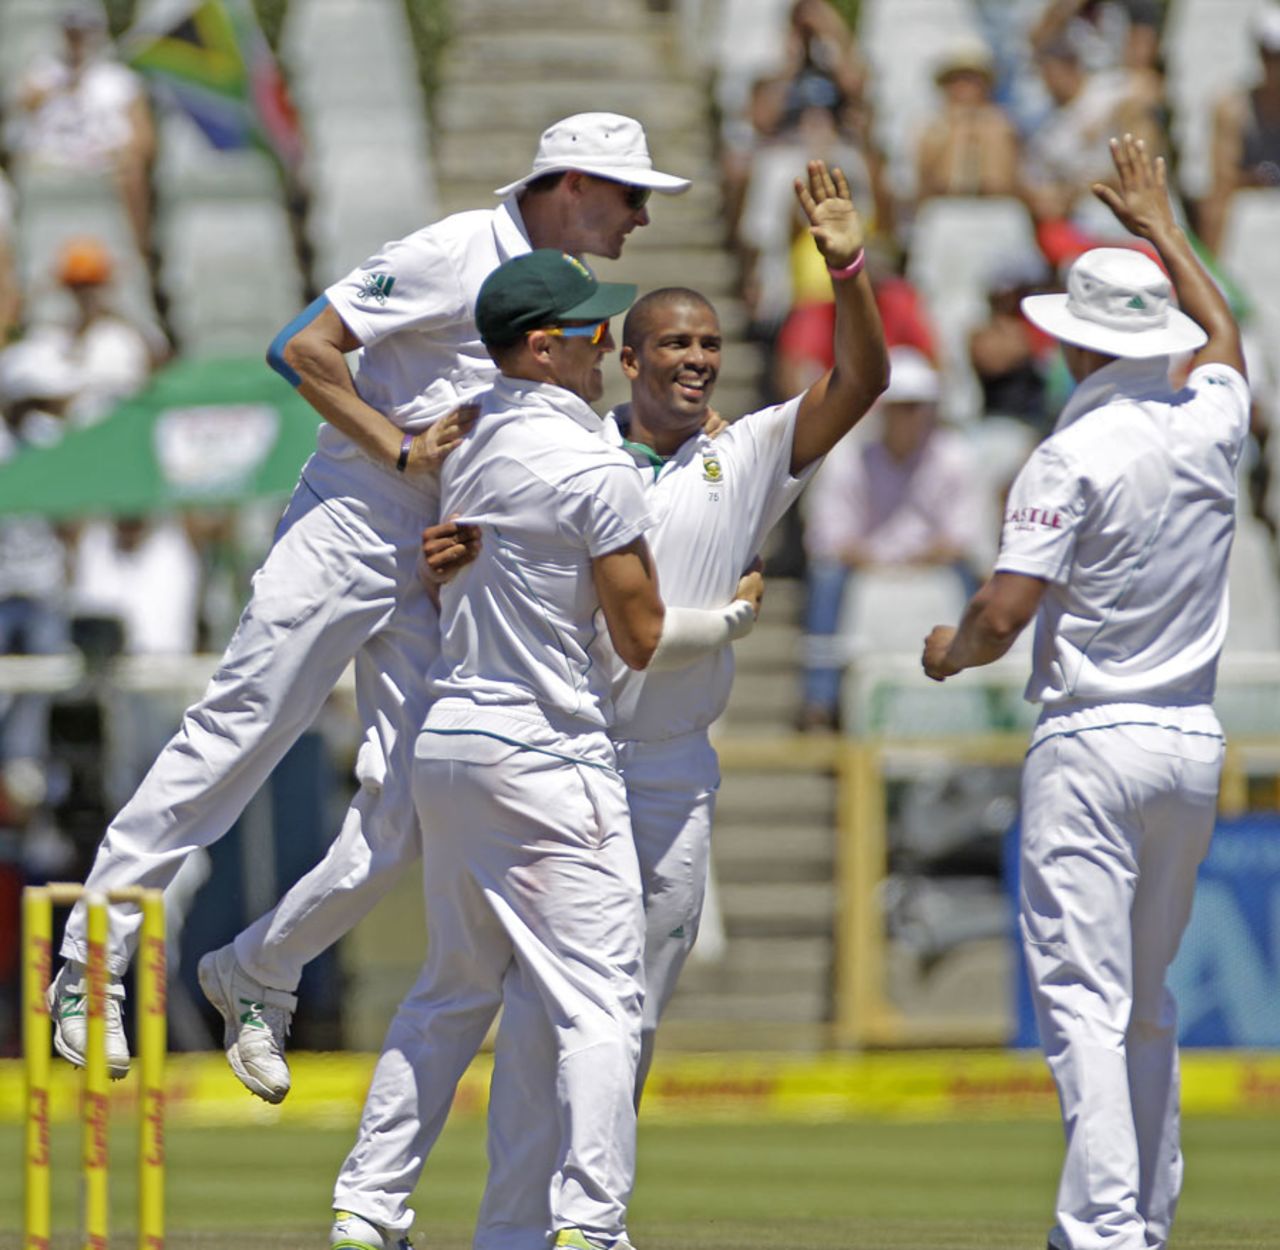 Vernon Philander was among the wickets again, South Africa v Pakistan, 2nd Test, Cape Town, 4th day, February 17, 2013